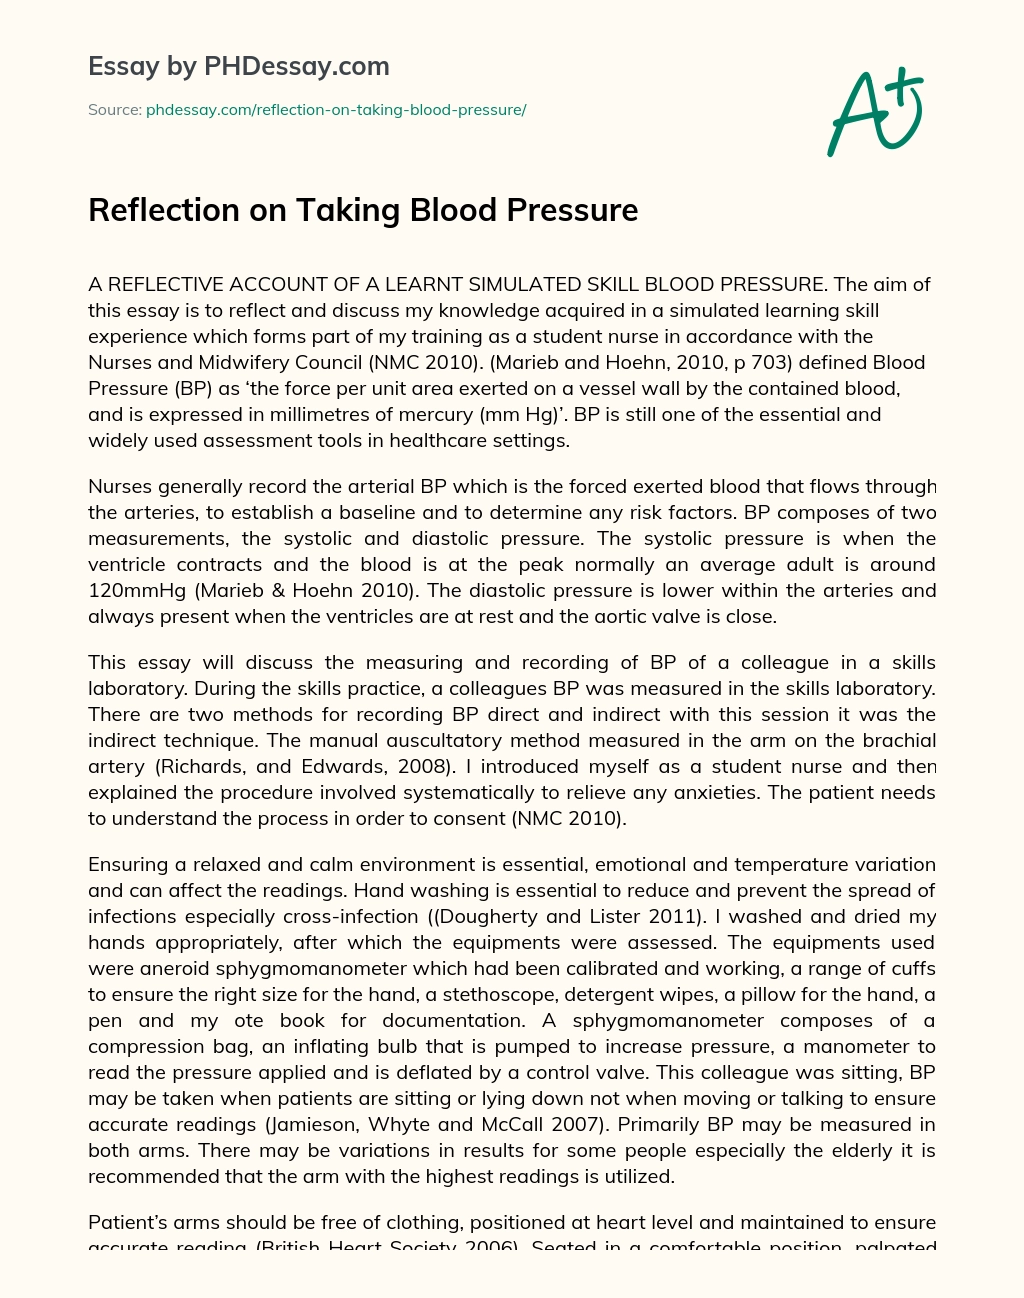 Reflection on Taking Blood Pressure essay